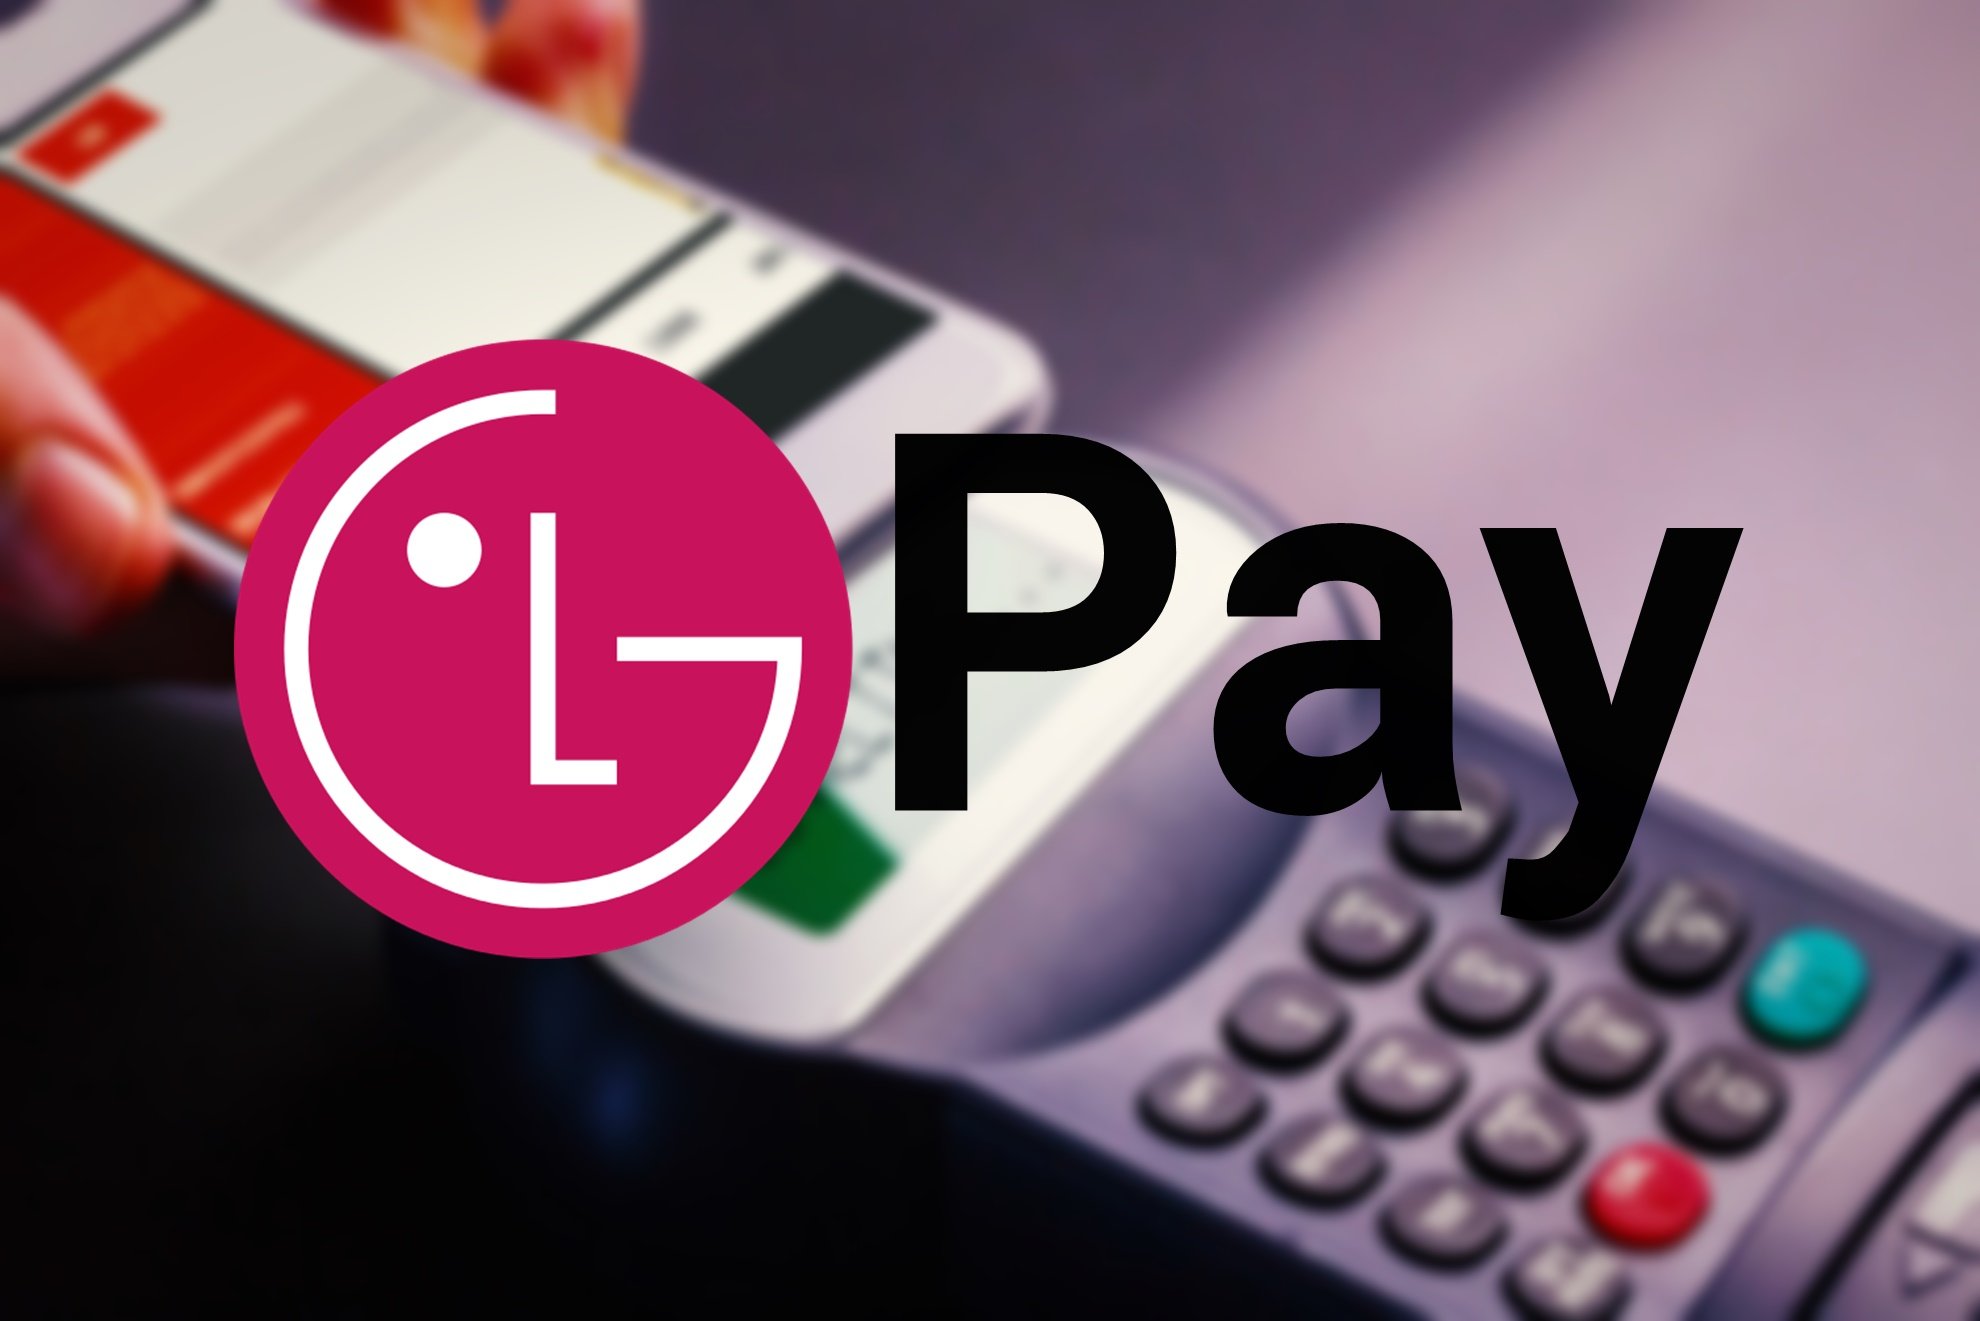 Learn how LG can replace all your credit and debit cards